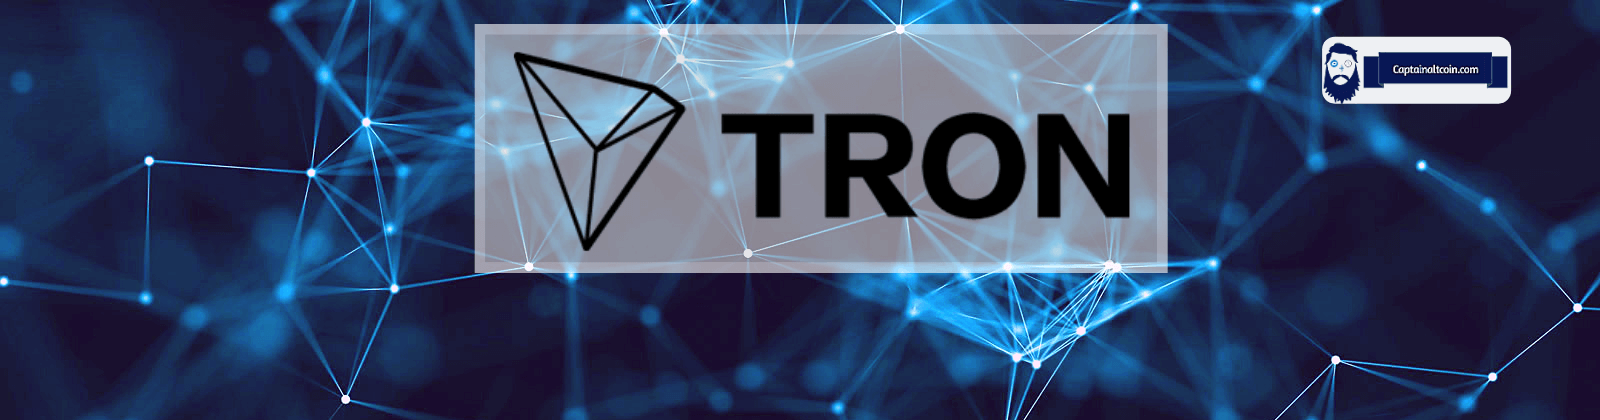 Tron Price Prediction 2022 -2030 | Is TRX a Good Investment?